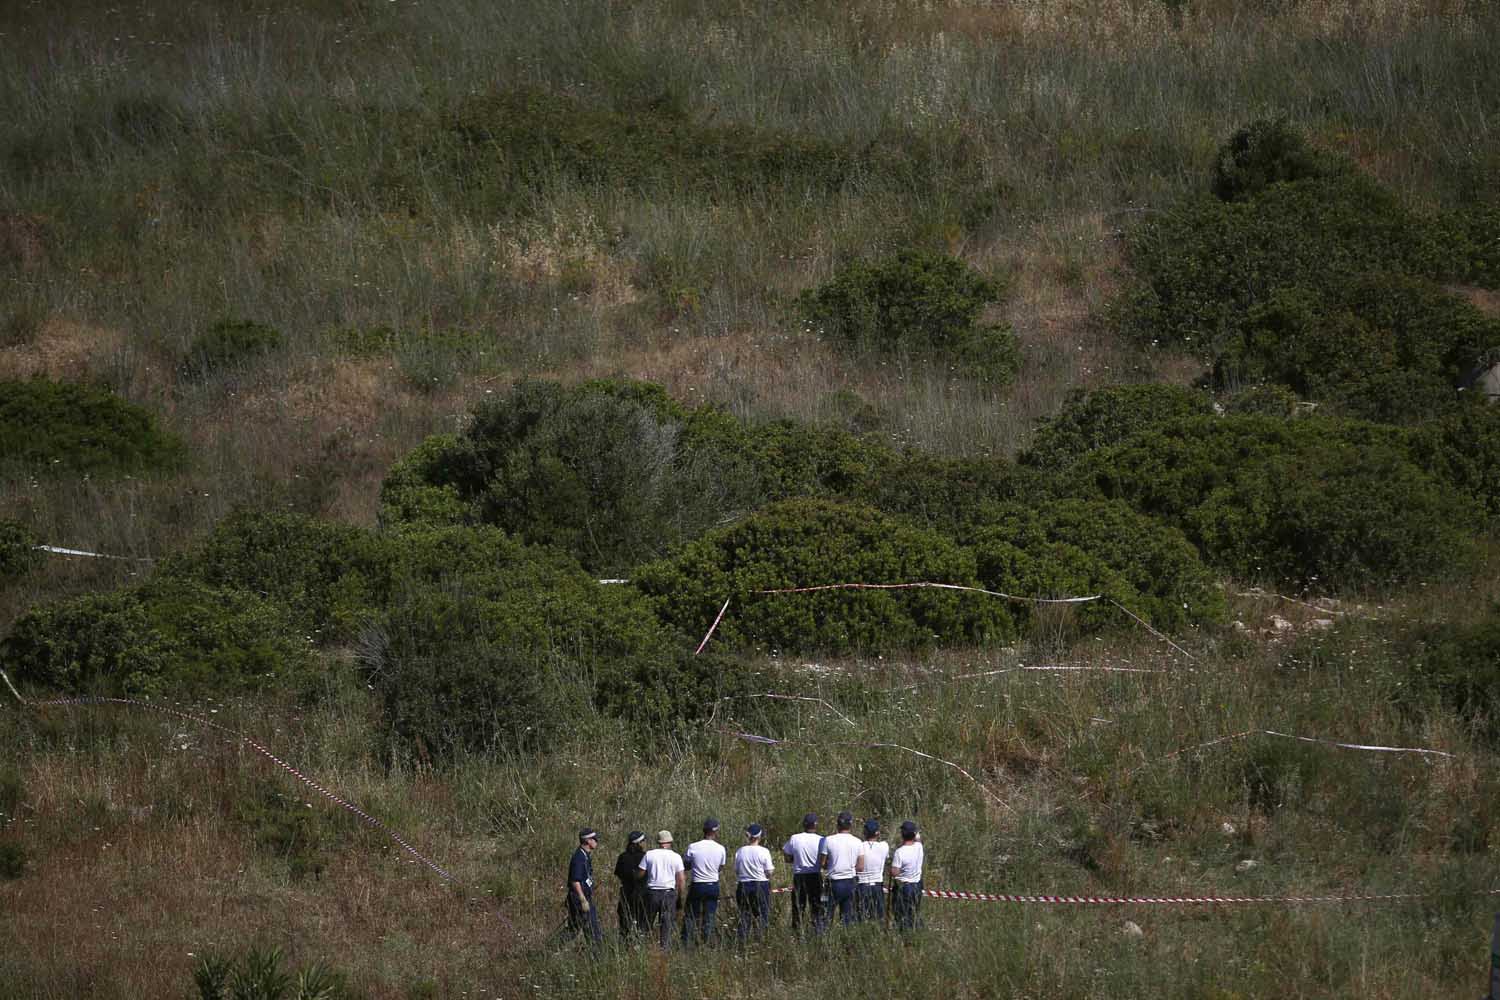 Members of Scotland Yard work at an area during the search for missing British girl Madeleine McCann in Praia da Luz